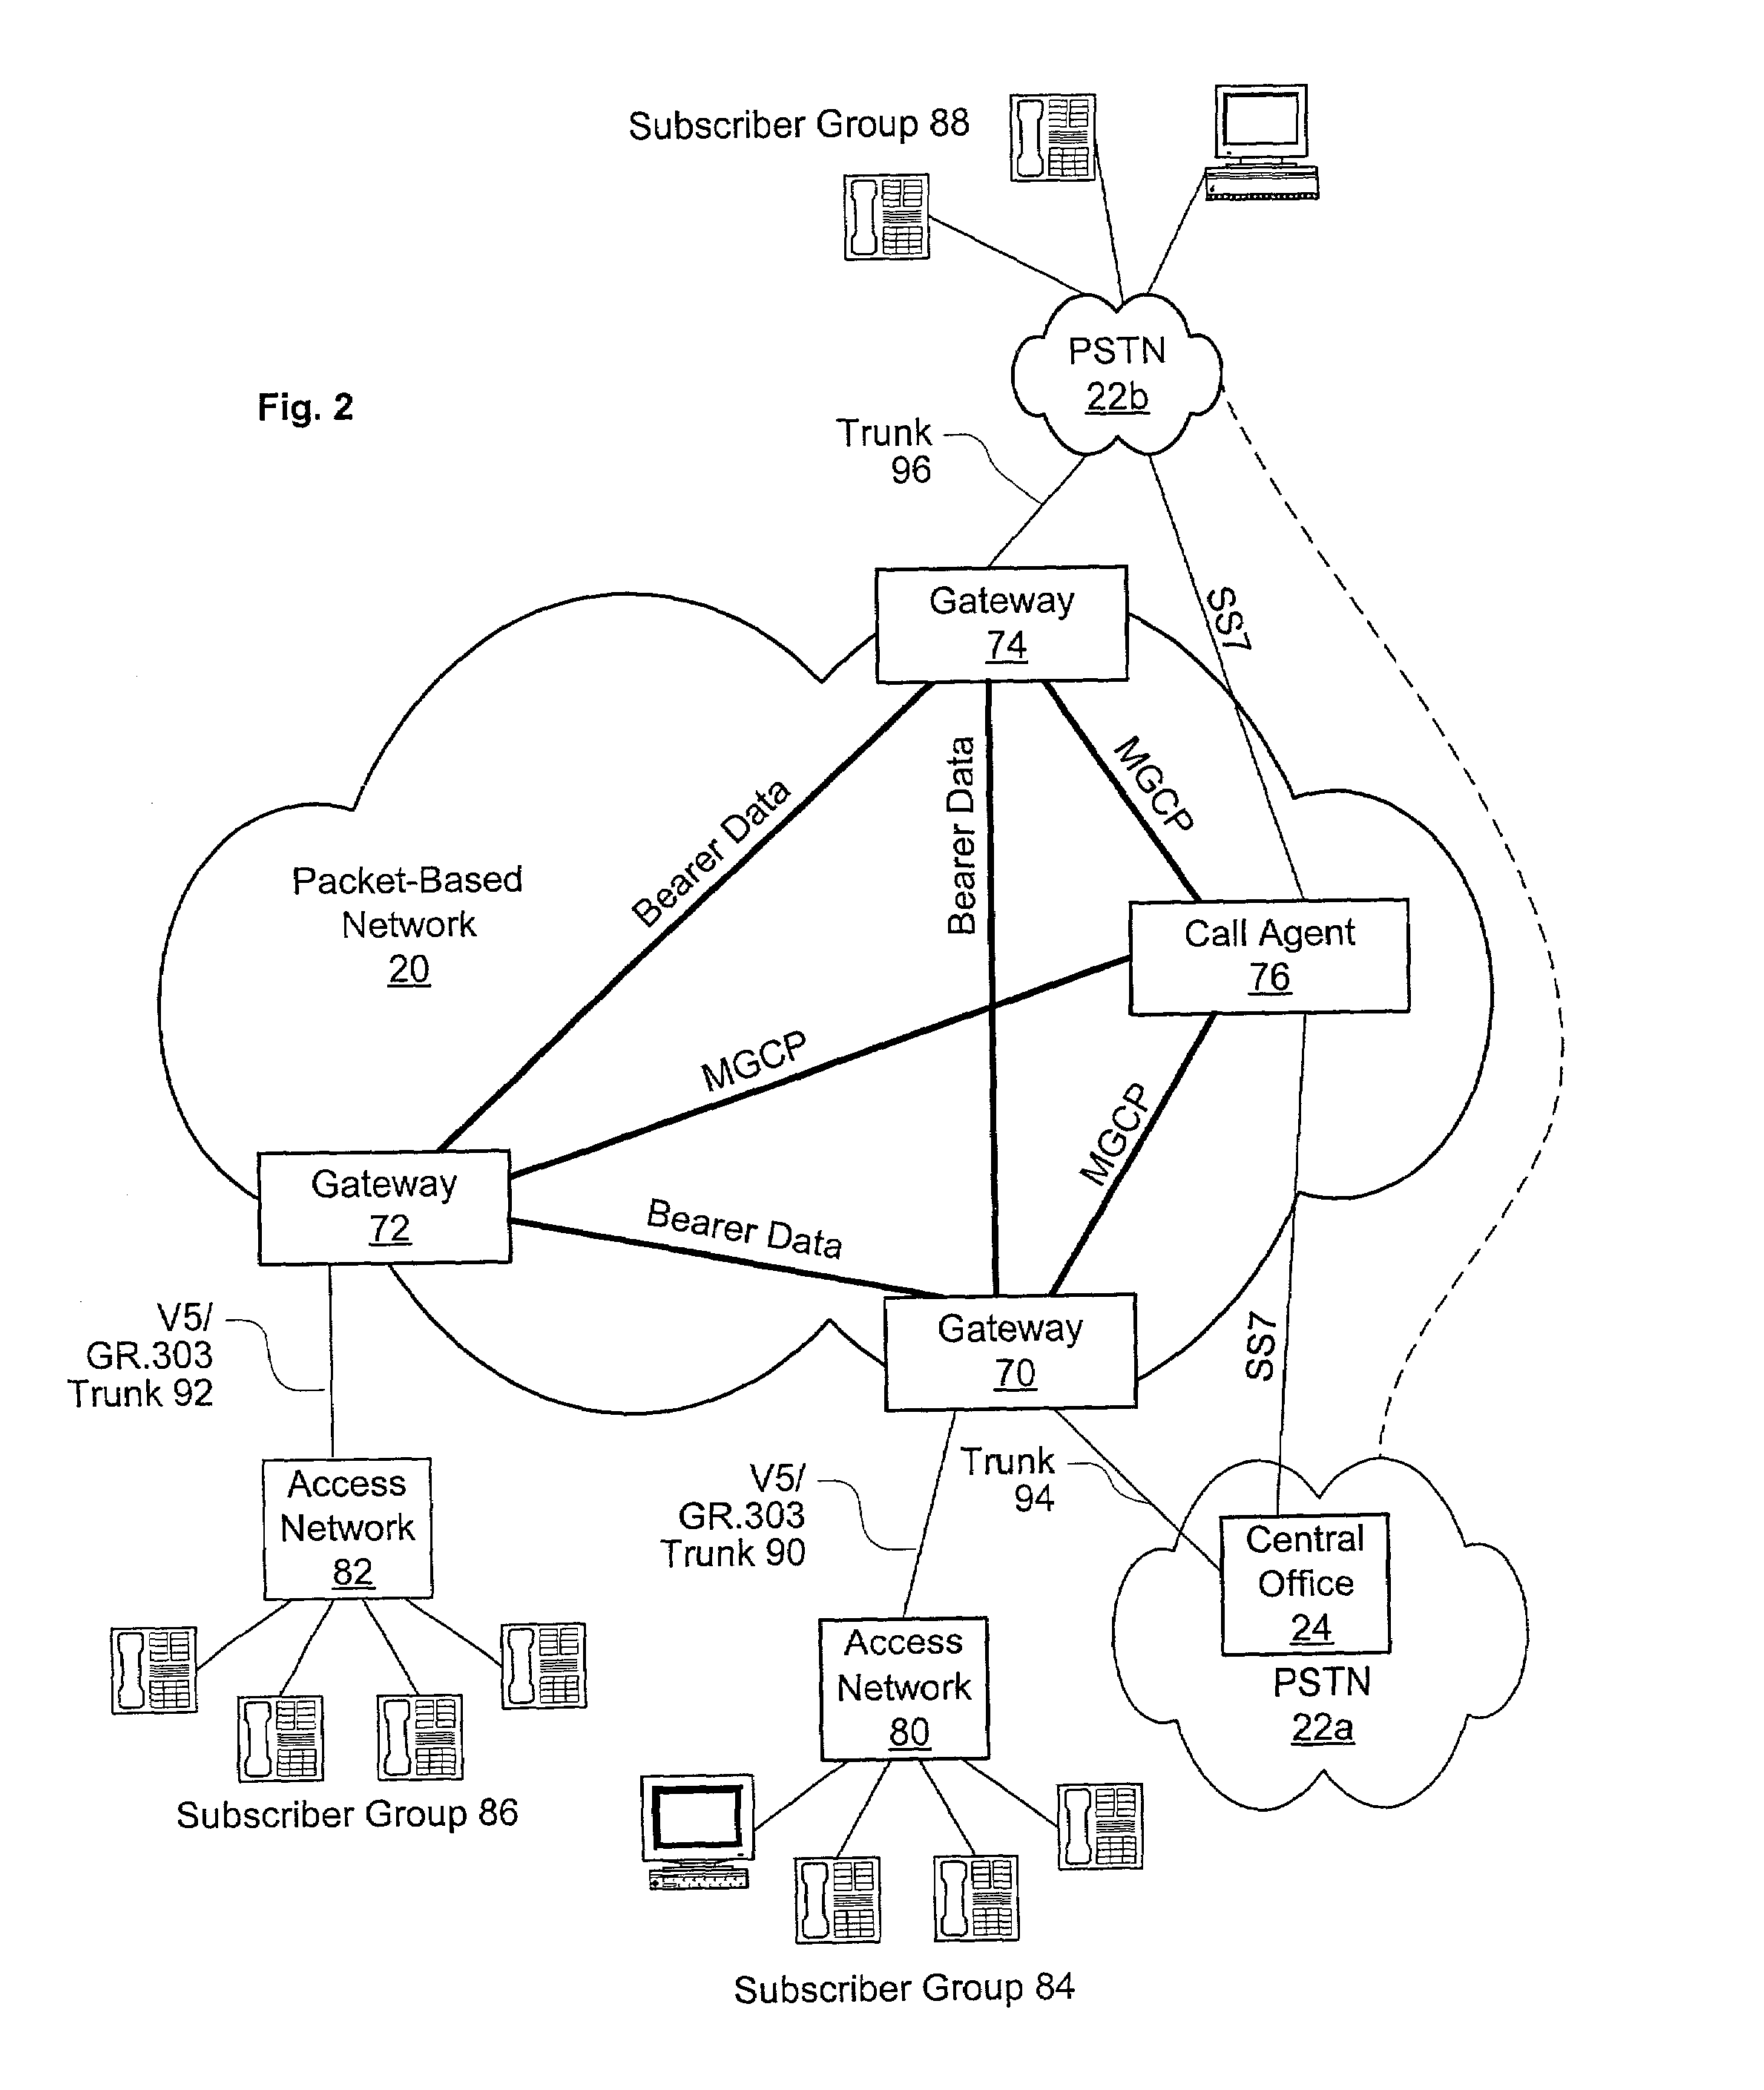 VoIP over access network